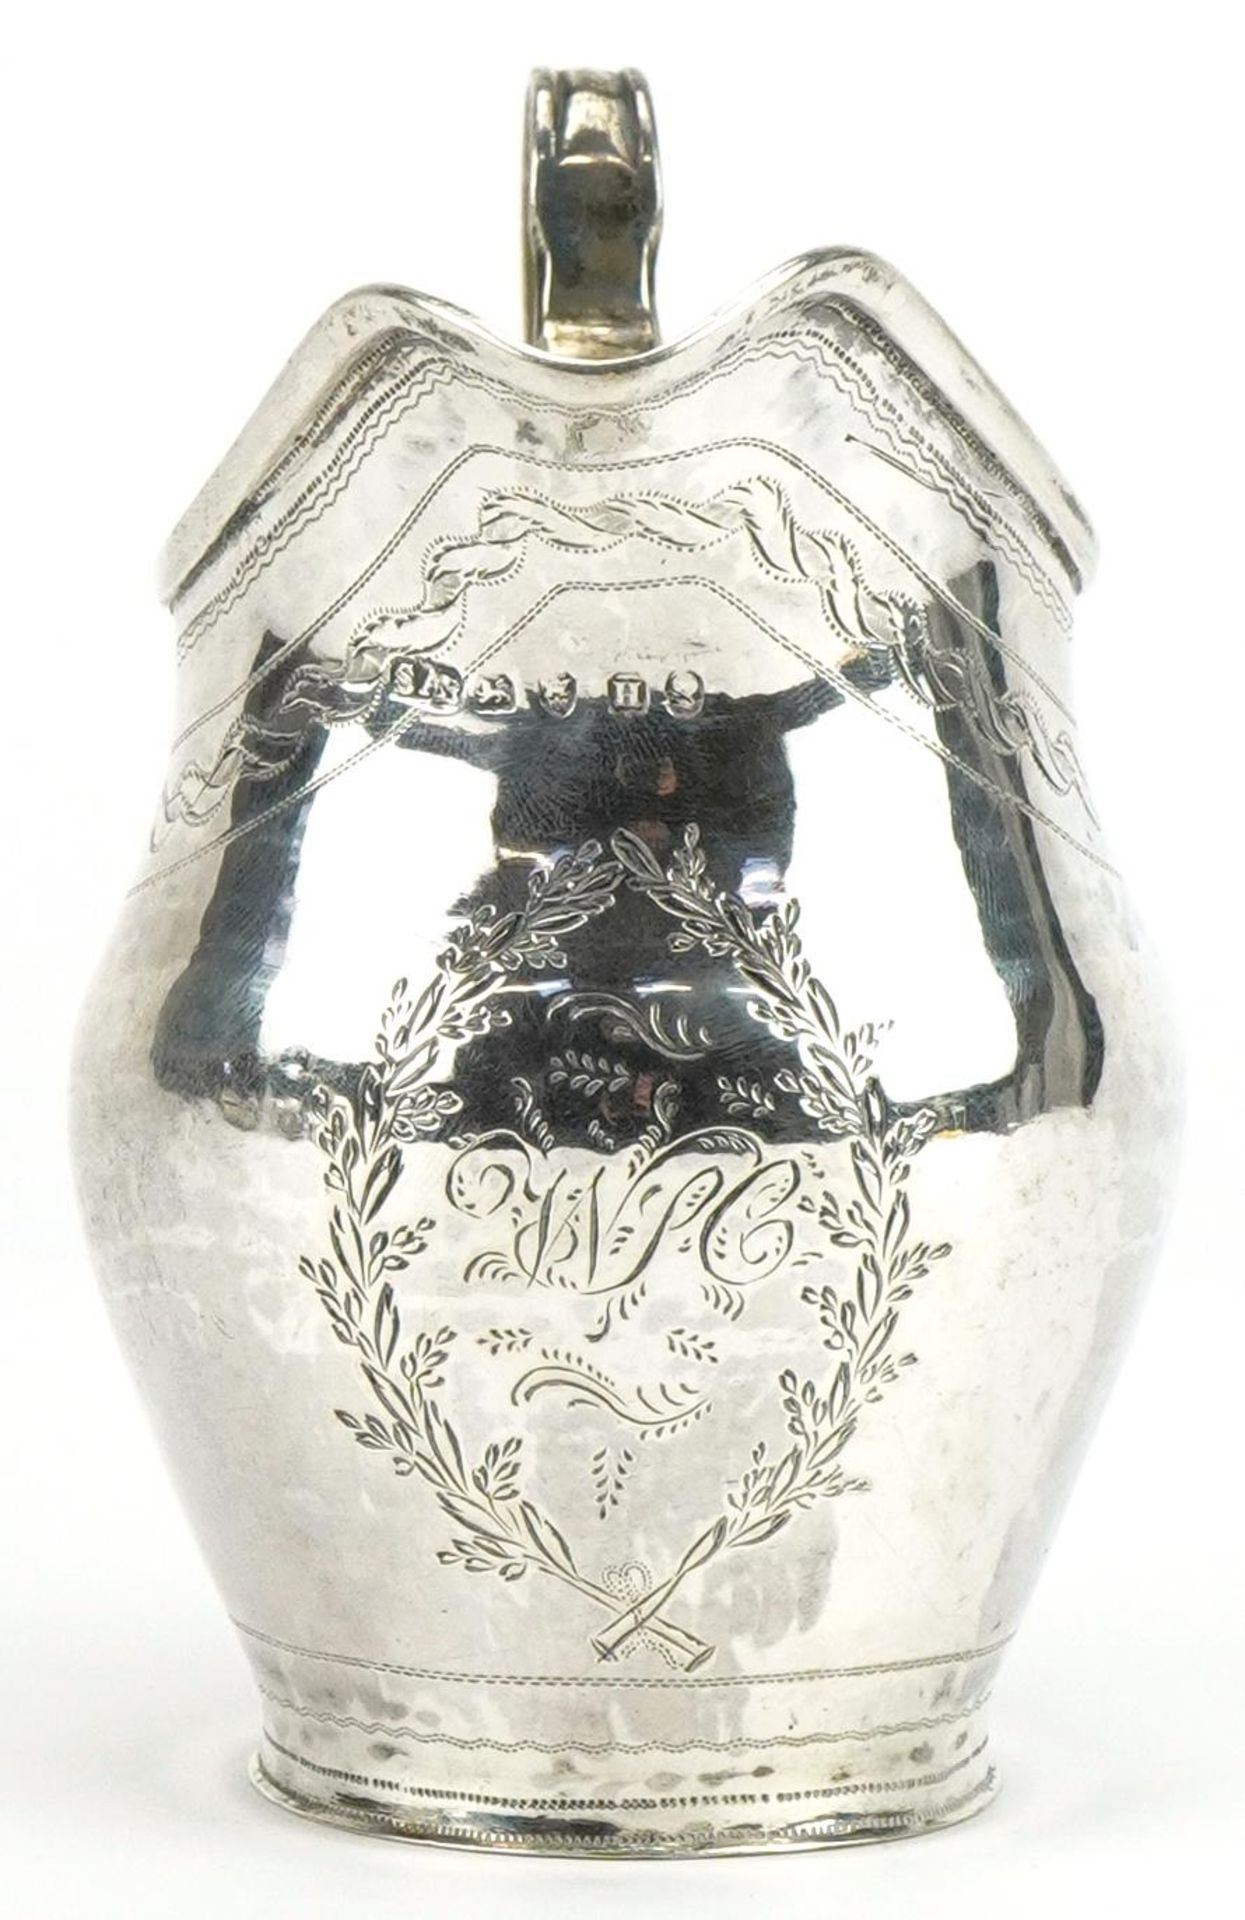 George IV silver cream jug with engraved decoration, indistinct maker's mark, possibly SAB, London - Image 2 of 5